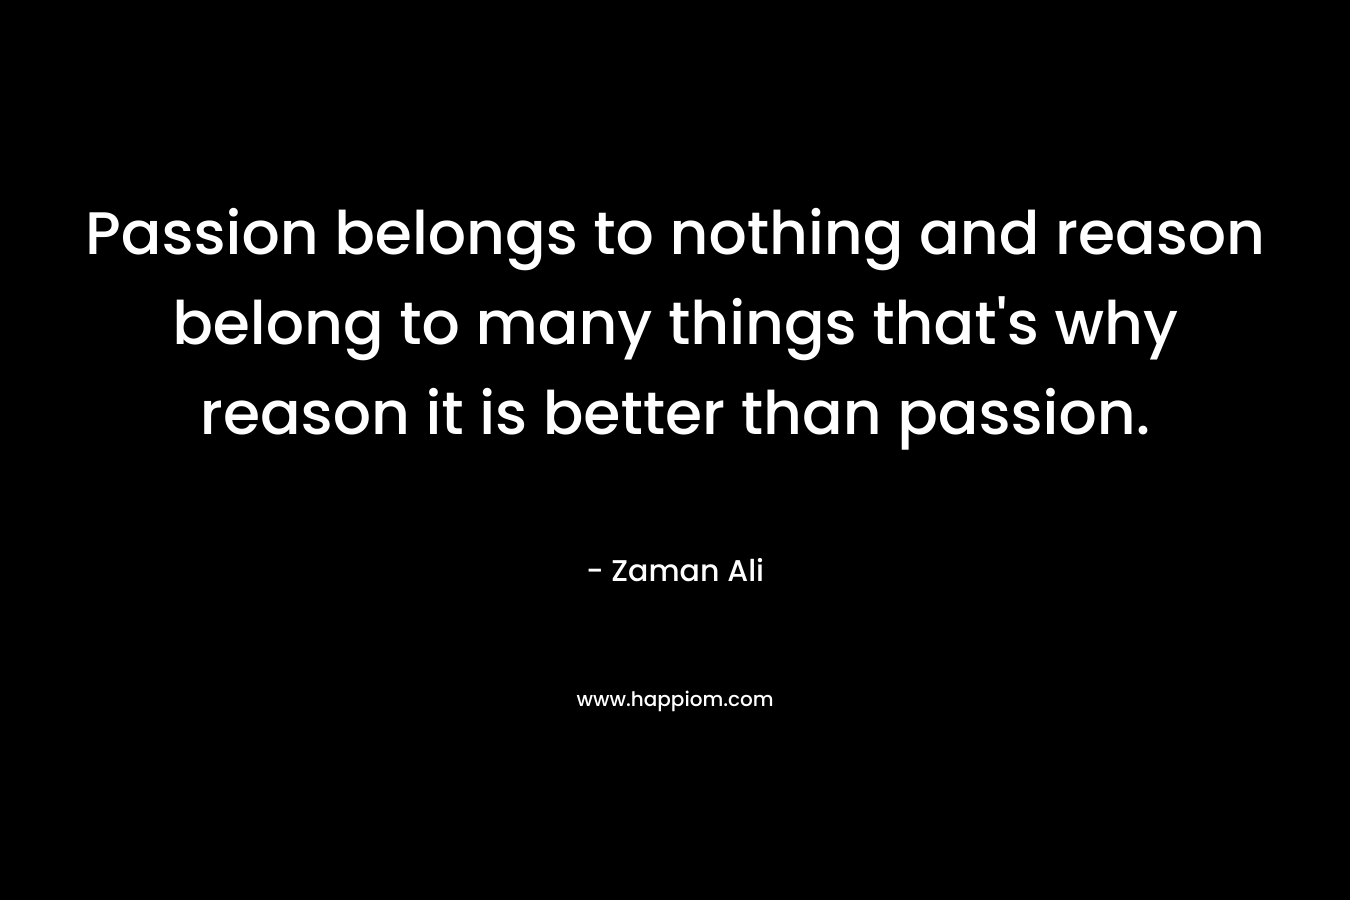 Passion belongs to nothing and reason belong to many things that’s why reason it is better than passion. – Zaman Ali